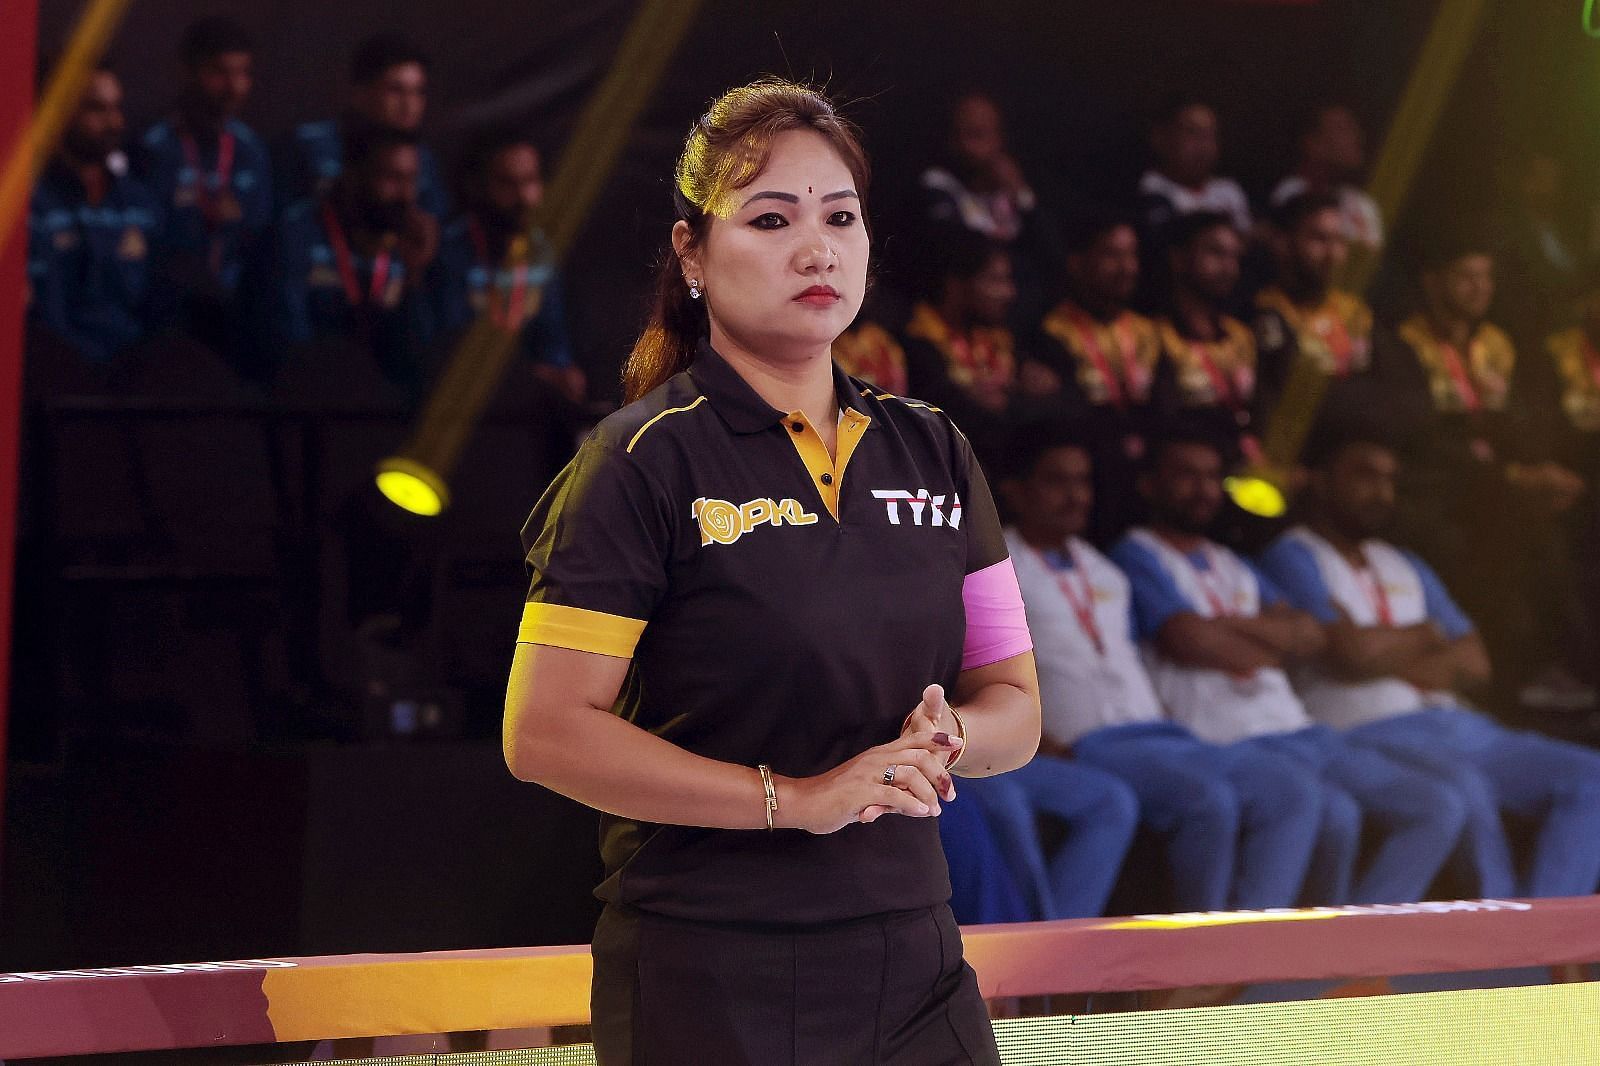 Boro became a professional kabaddi coach after passing an exam conducted by Amateur Kabaddi Federation of India (AKFI) in 2015